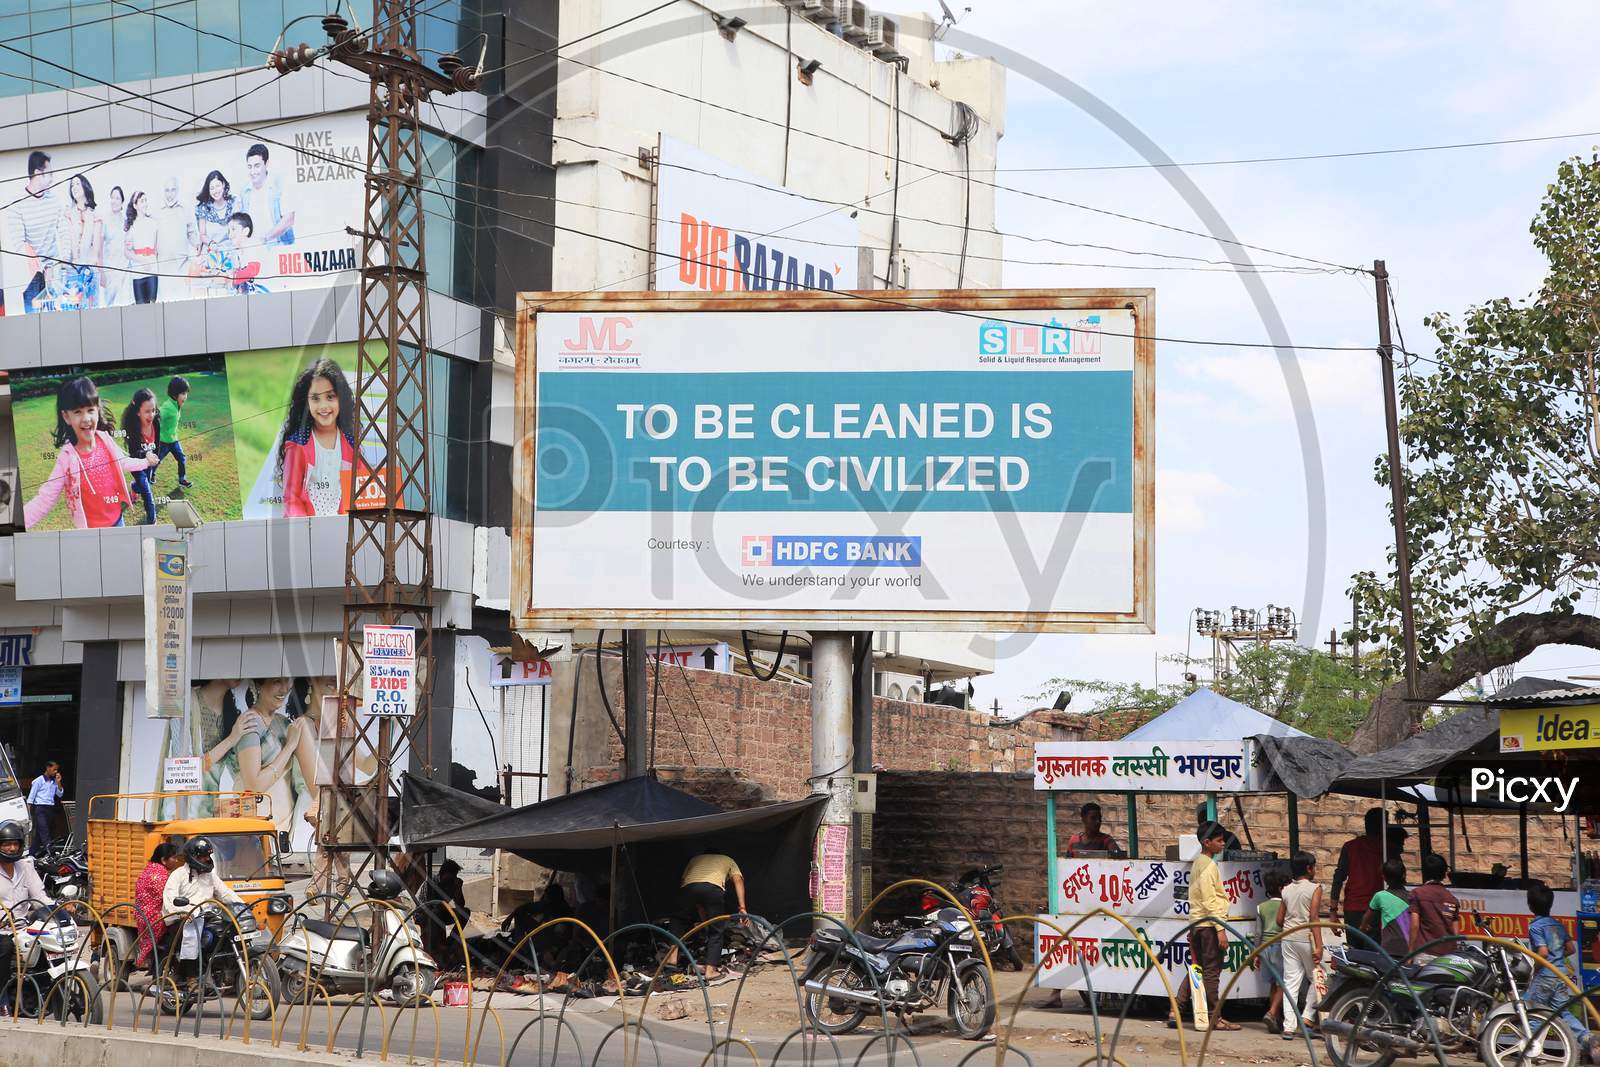 To be cleaned is to be civilized billboard